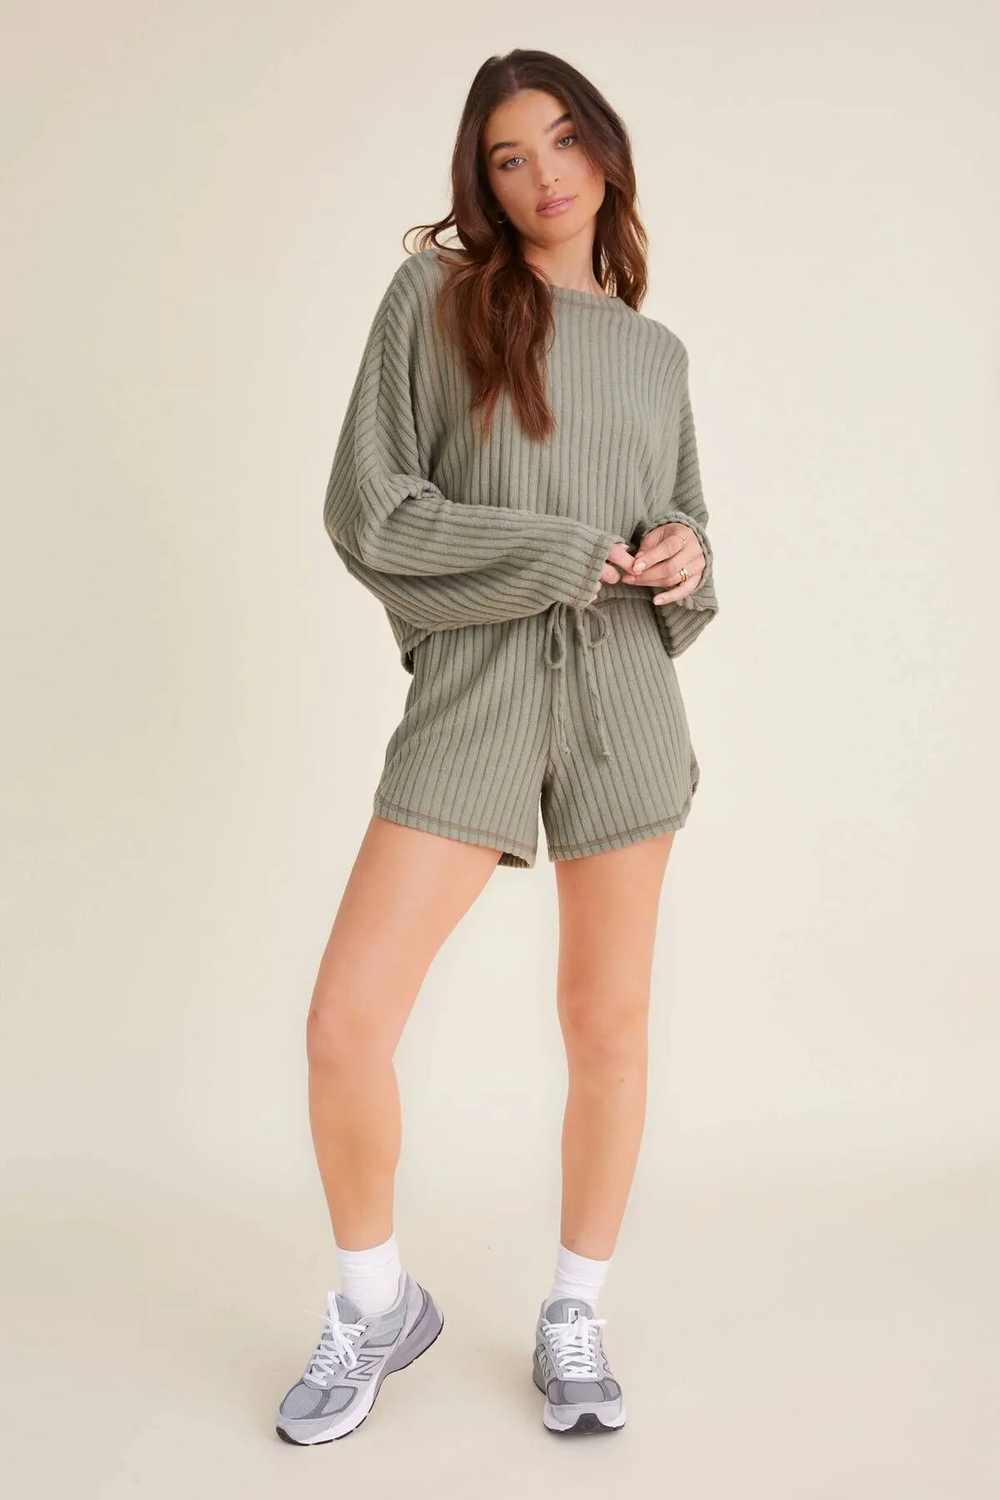 COZY SHORT-LILO WILD THYME - Kingfisher Road - Online Boutique